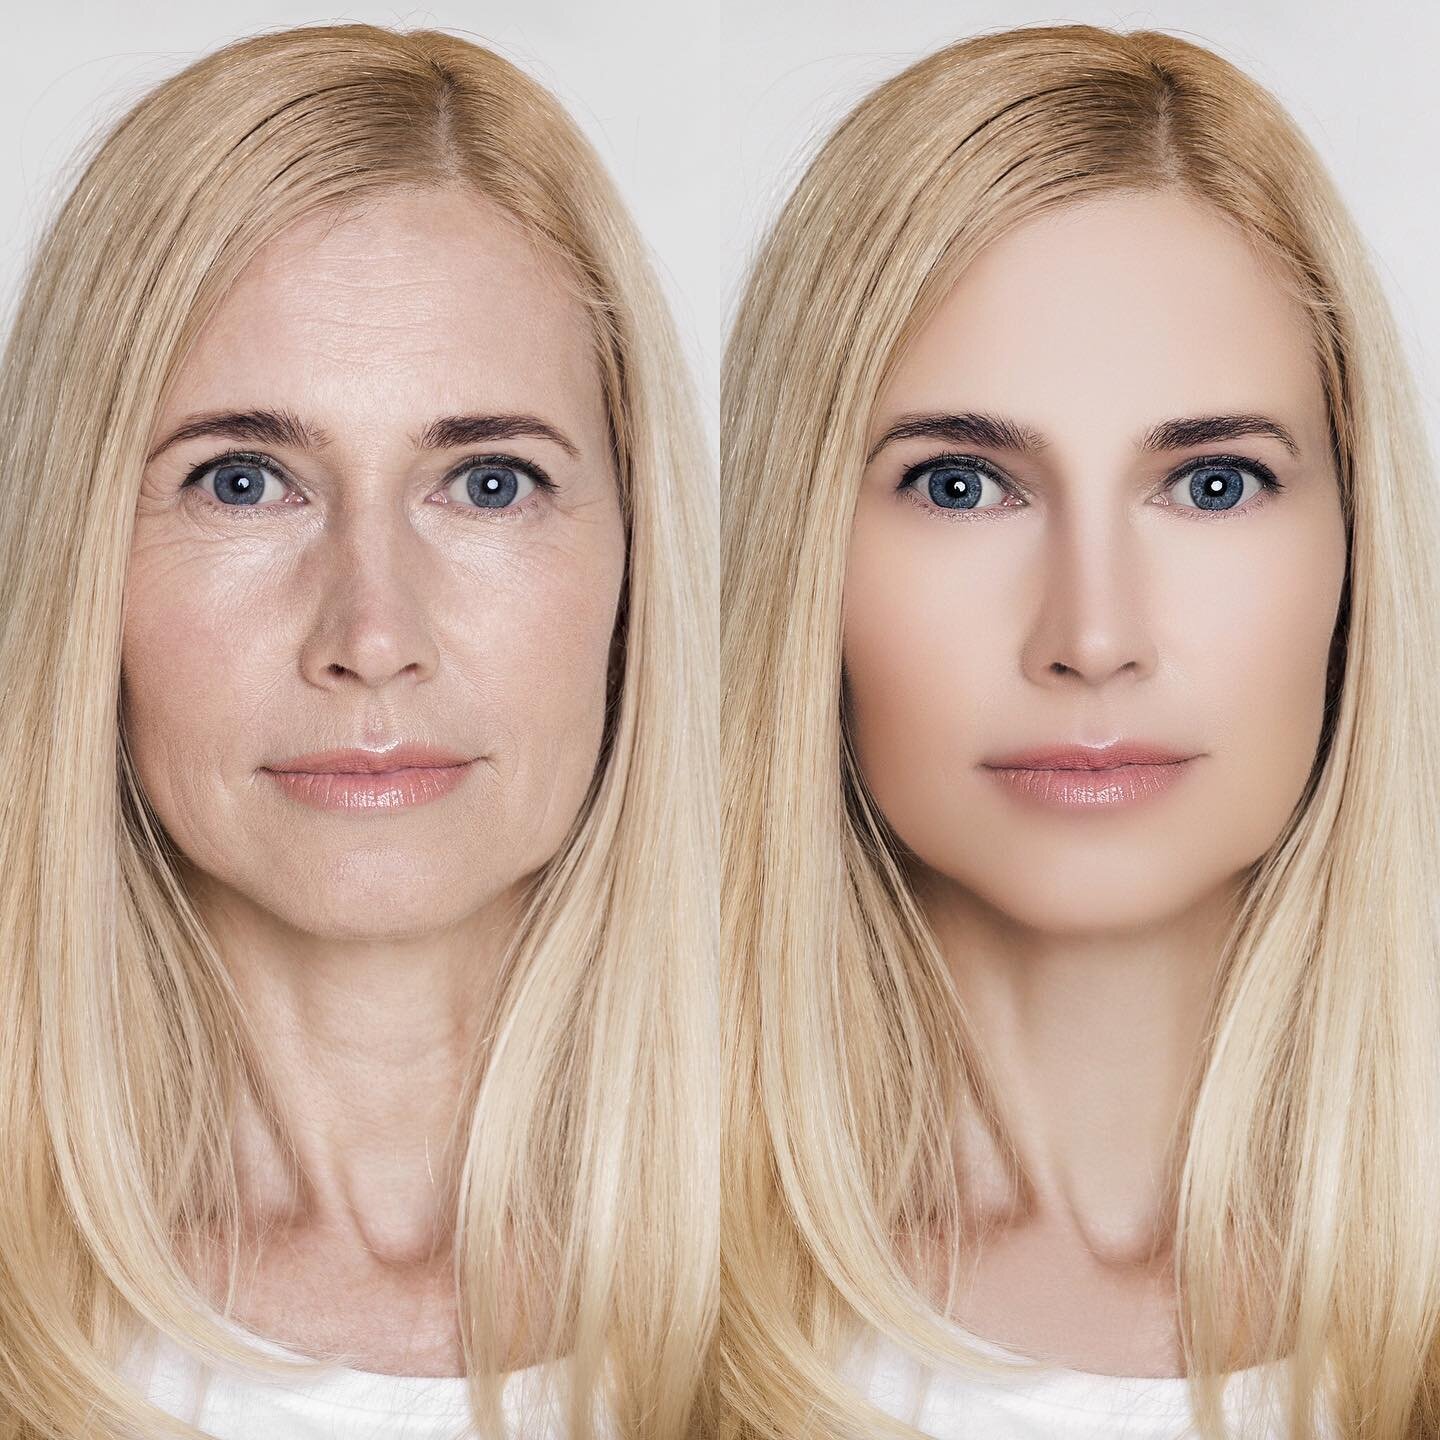 Extreme retouching. I don&rsquo;t usually retouch this heavily but I thought why not try it. #extremeretouching #beforeandafter #photoshopping #facesculpting #agereduction 
@photoshop @adobecreativecloud